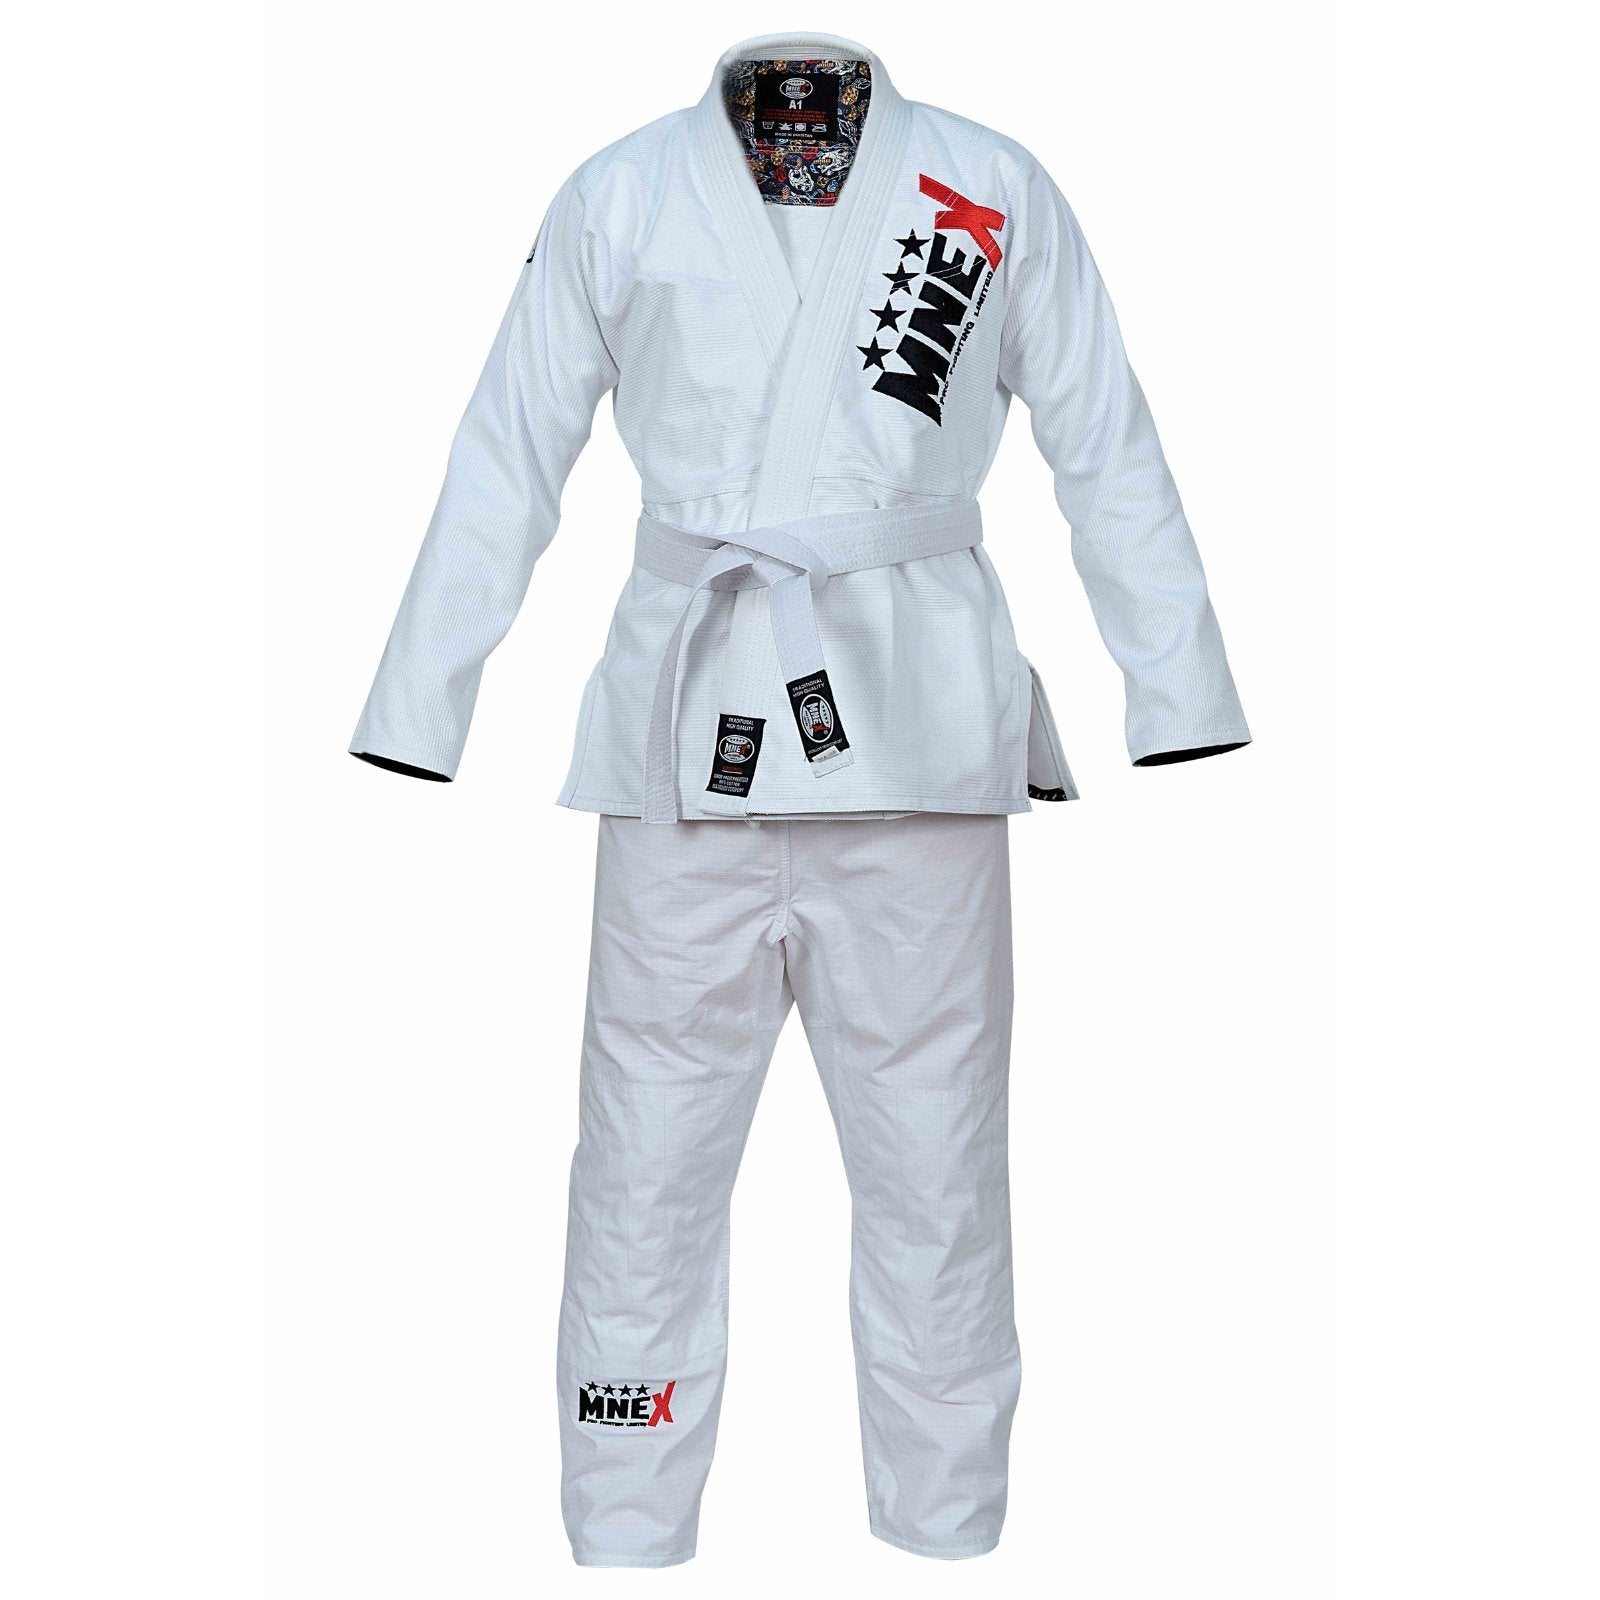 Our BJJ Gi Suits - MNEX PRO FIGHTING LIMITED